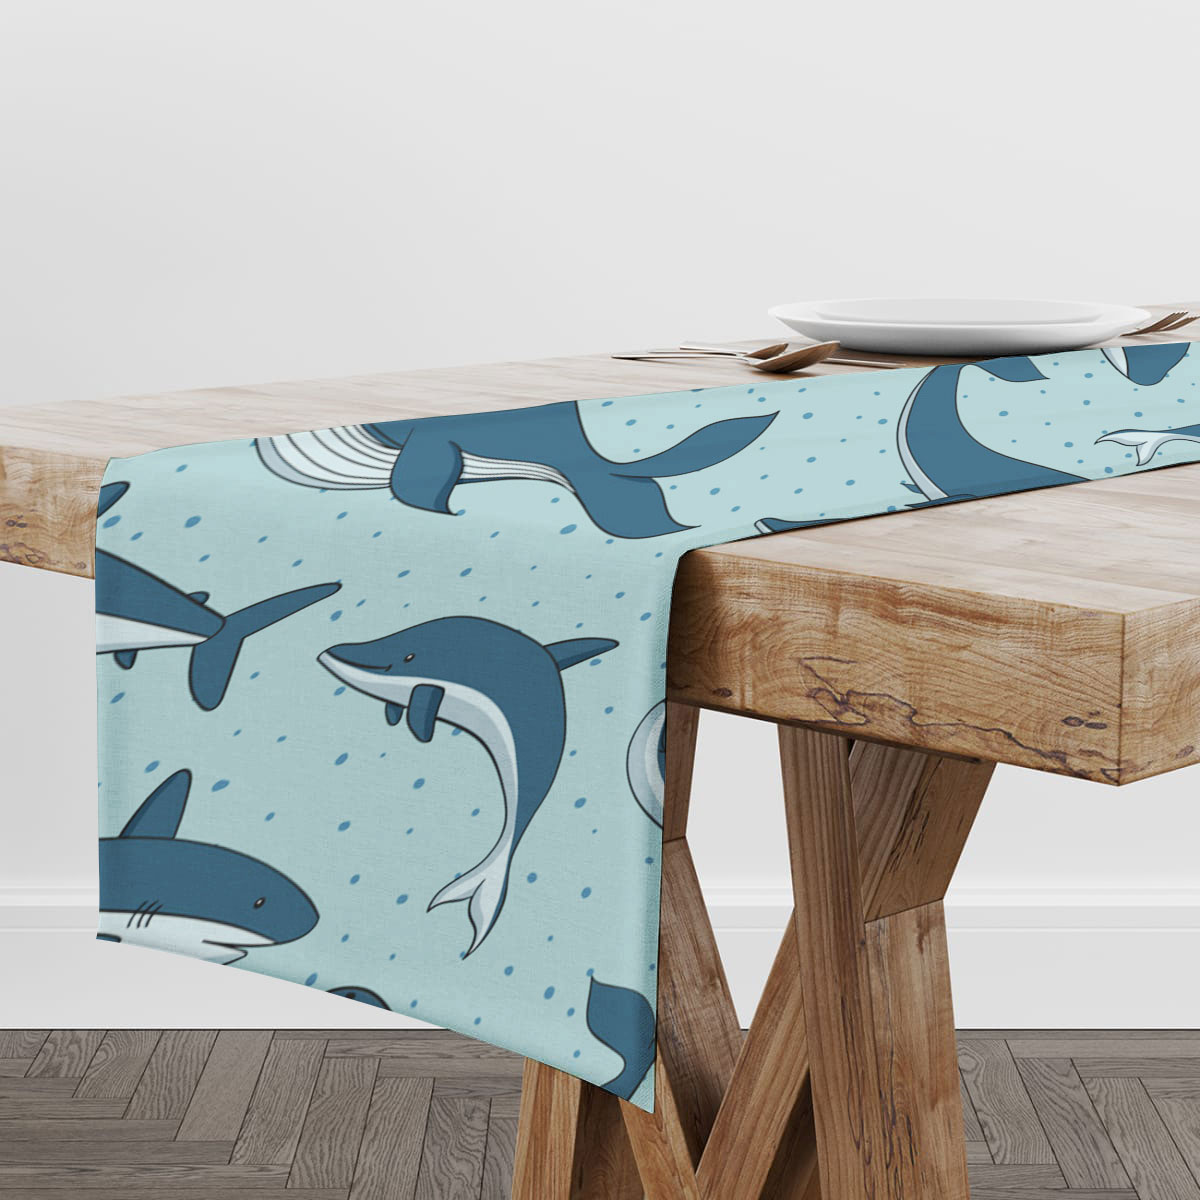 Narwhal Whale Shark Dolphin Table Runner